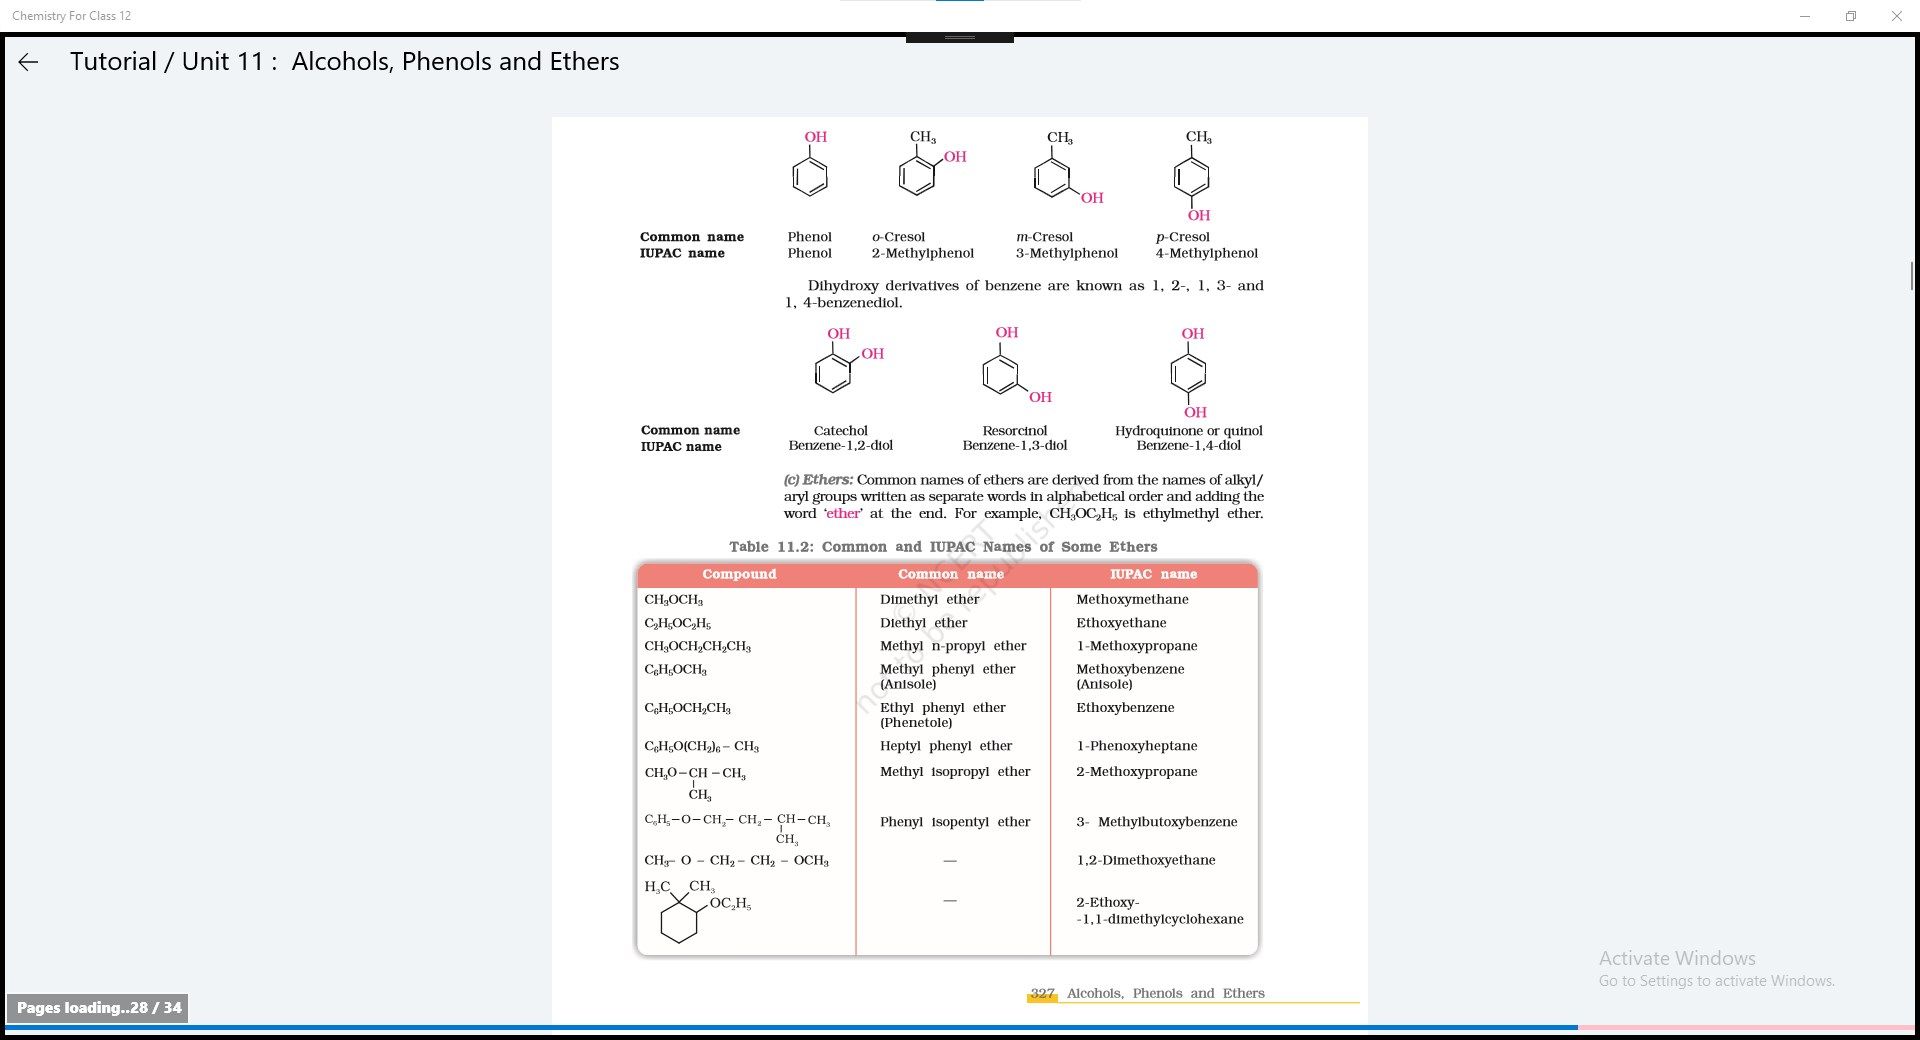 Chemistry For Class 12